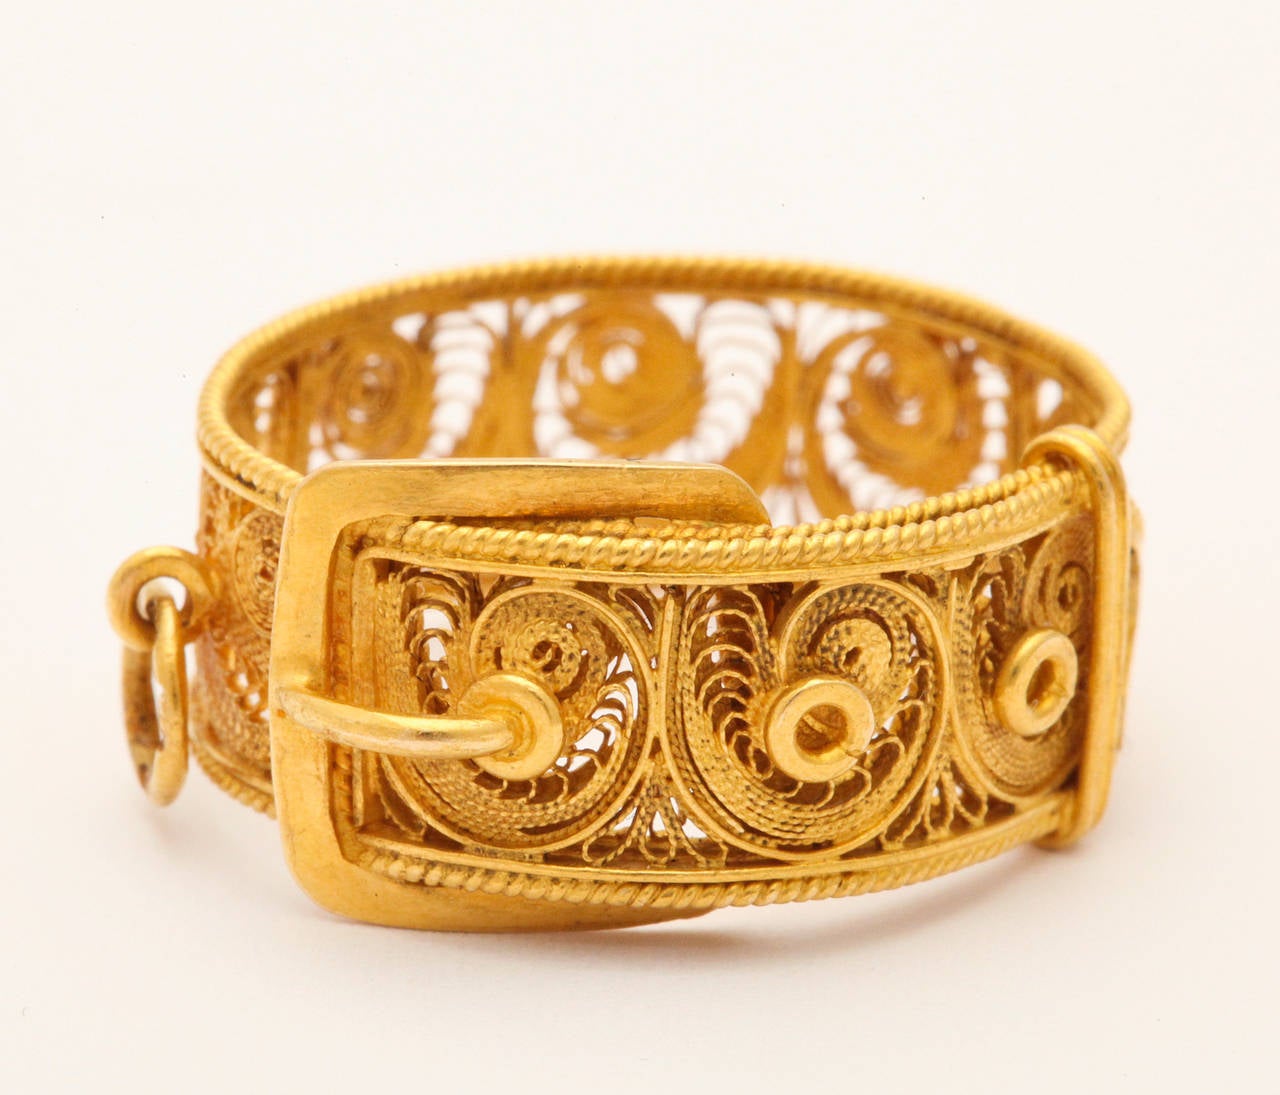 A  lace like band, created in 18kt gold way back at the brink of the Victorian era in Europe, is as beautiful today as the day it was made.  The golden filigree wraps around the band like ferns that are held on the finger with a buckle and strap.